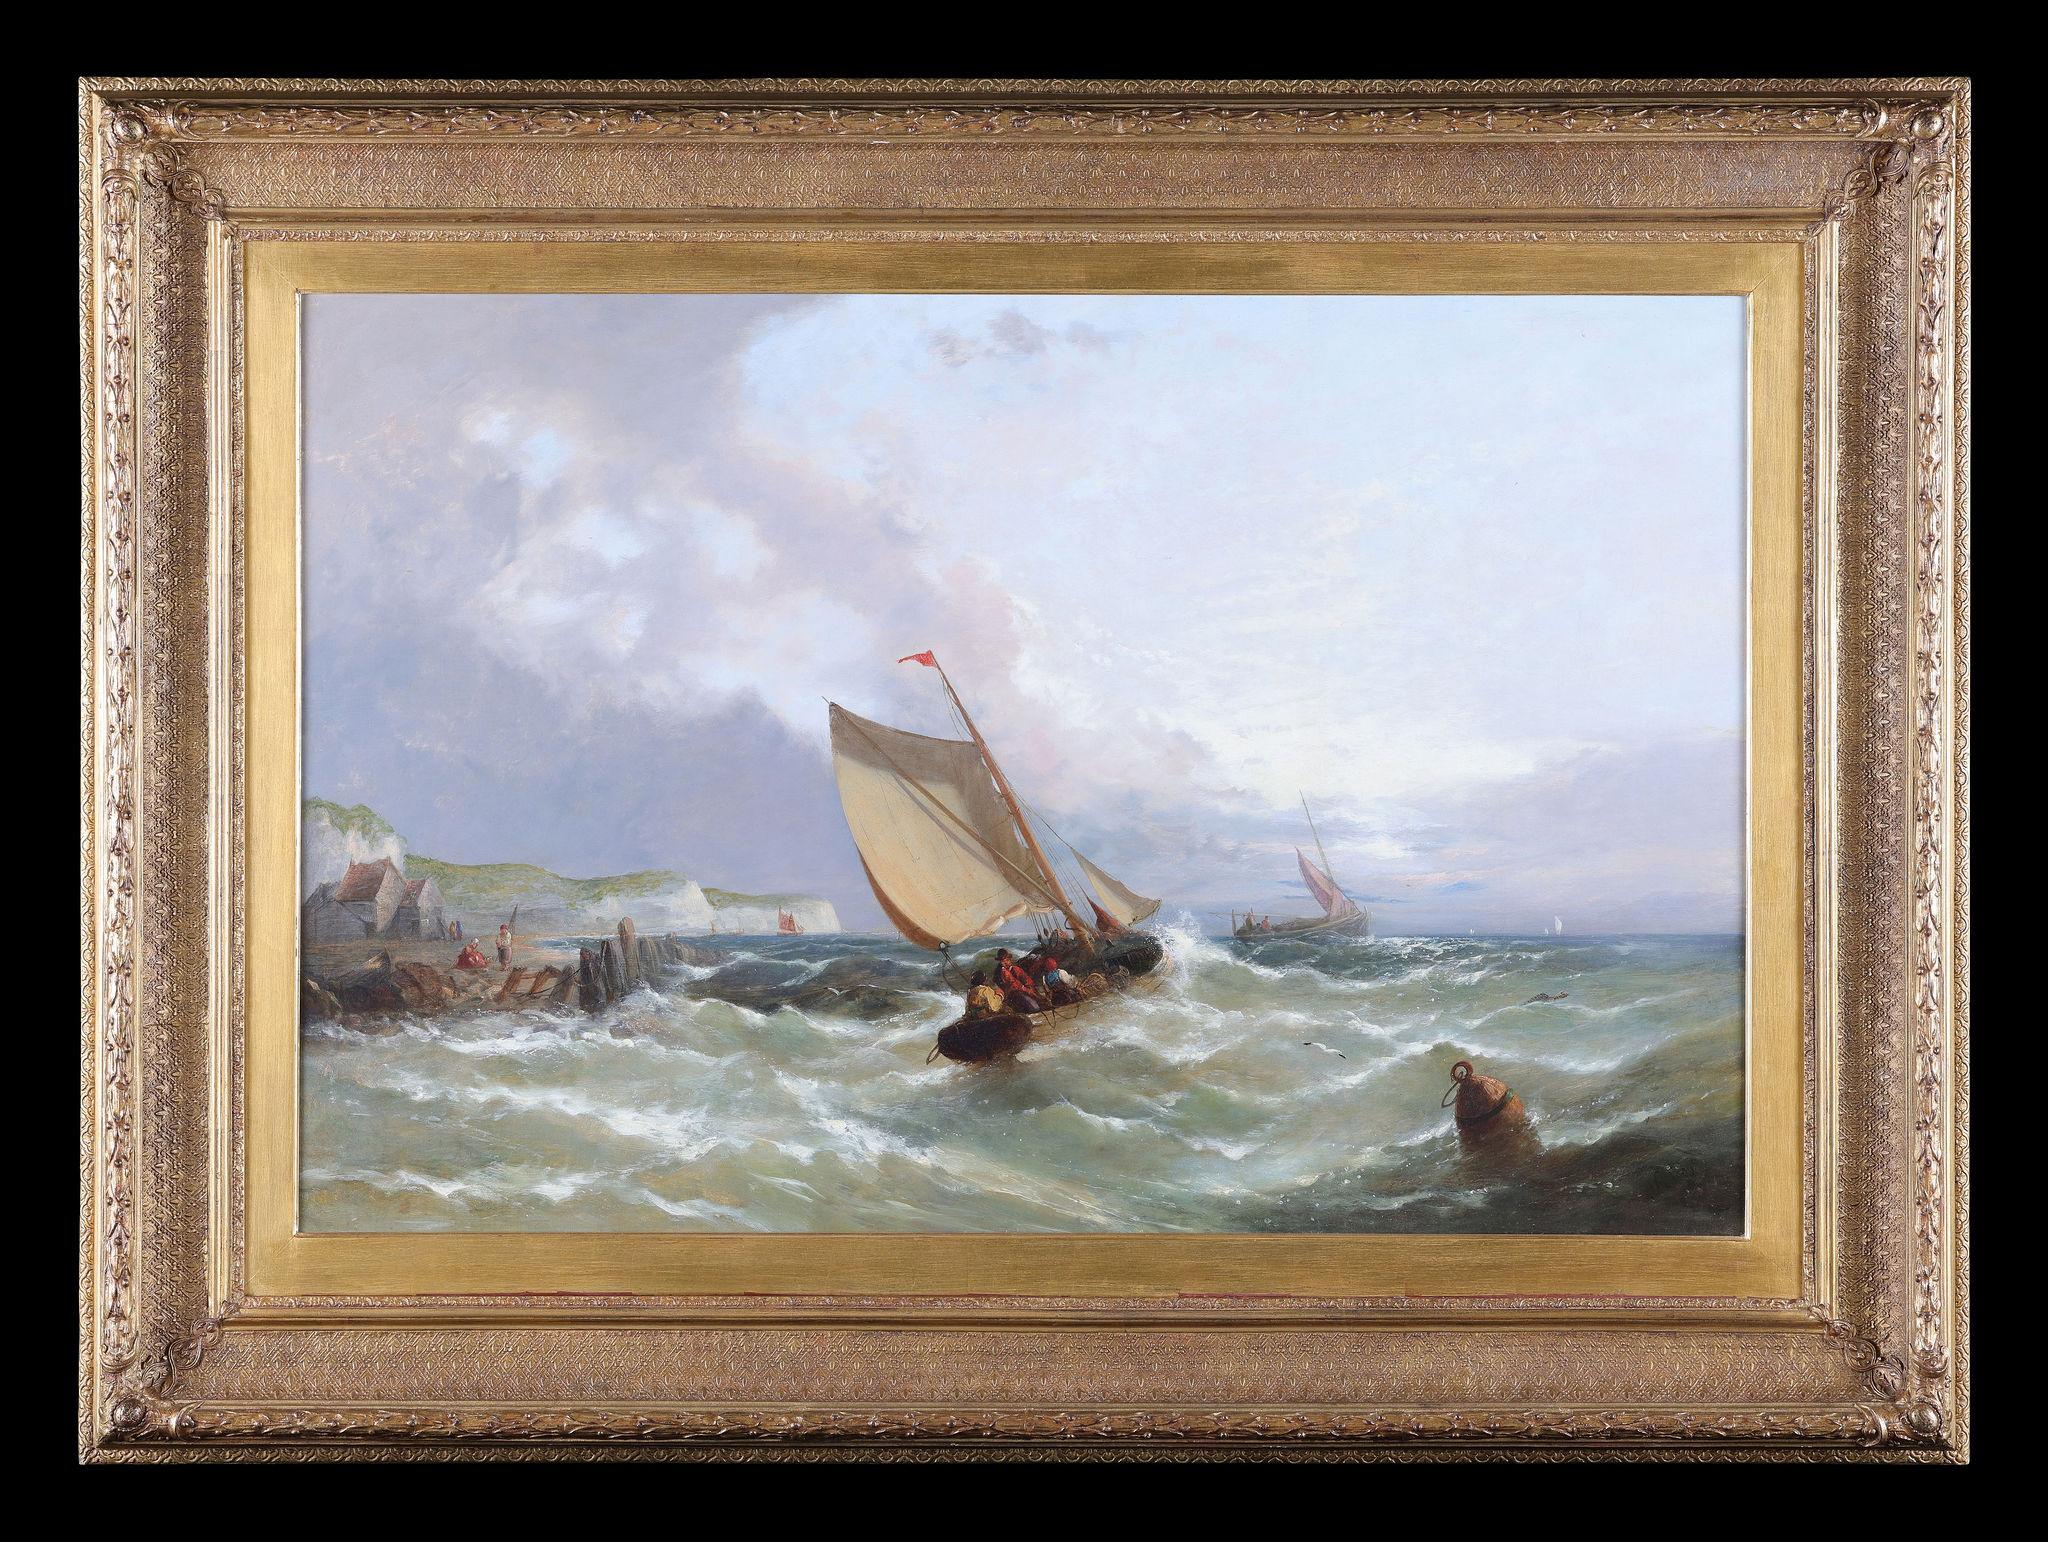 Stormy Seas - Painting by John Callow